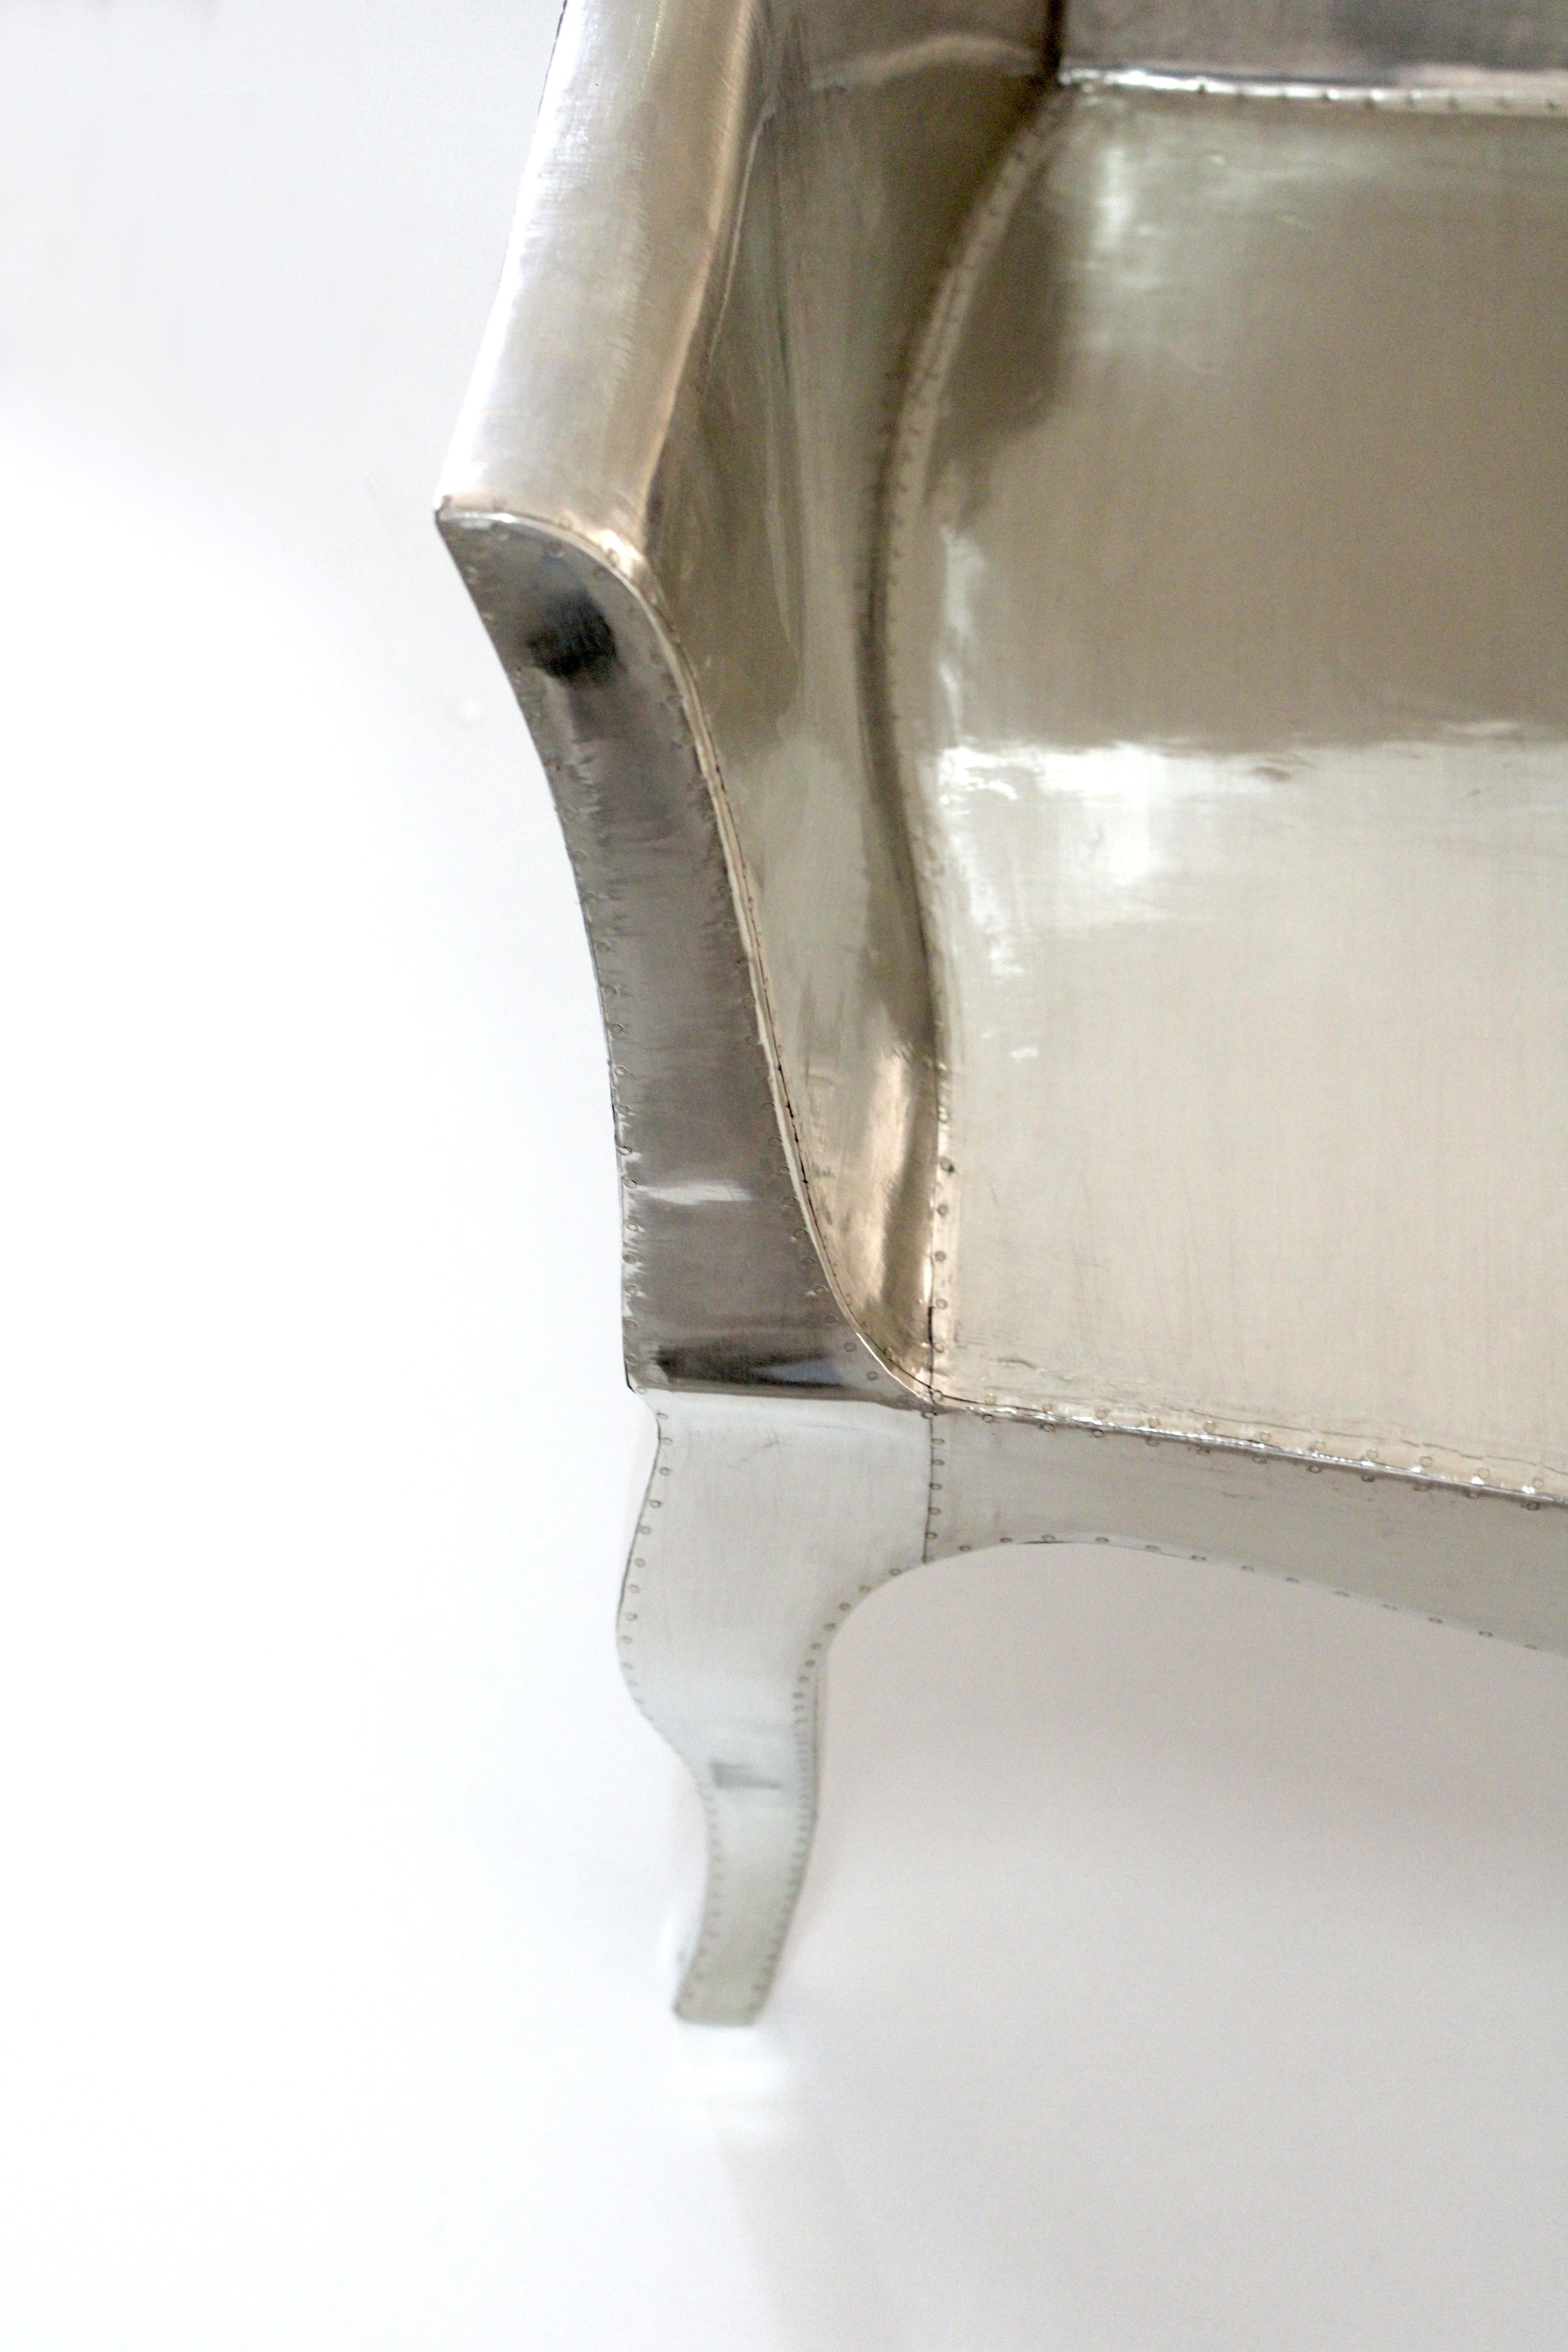 Other Antique Art Deco Chairs Smooth White Bronze by Paul Mathieu for S. Odegard For Sale